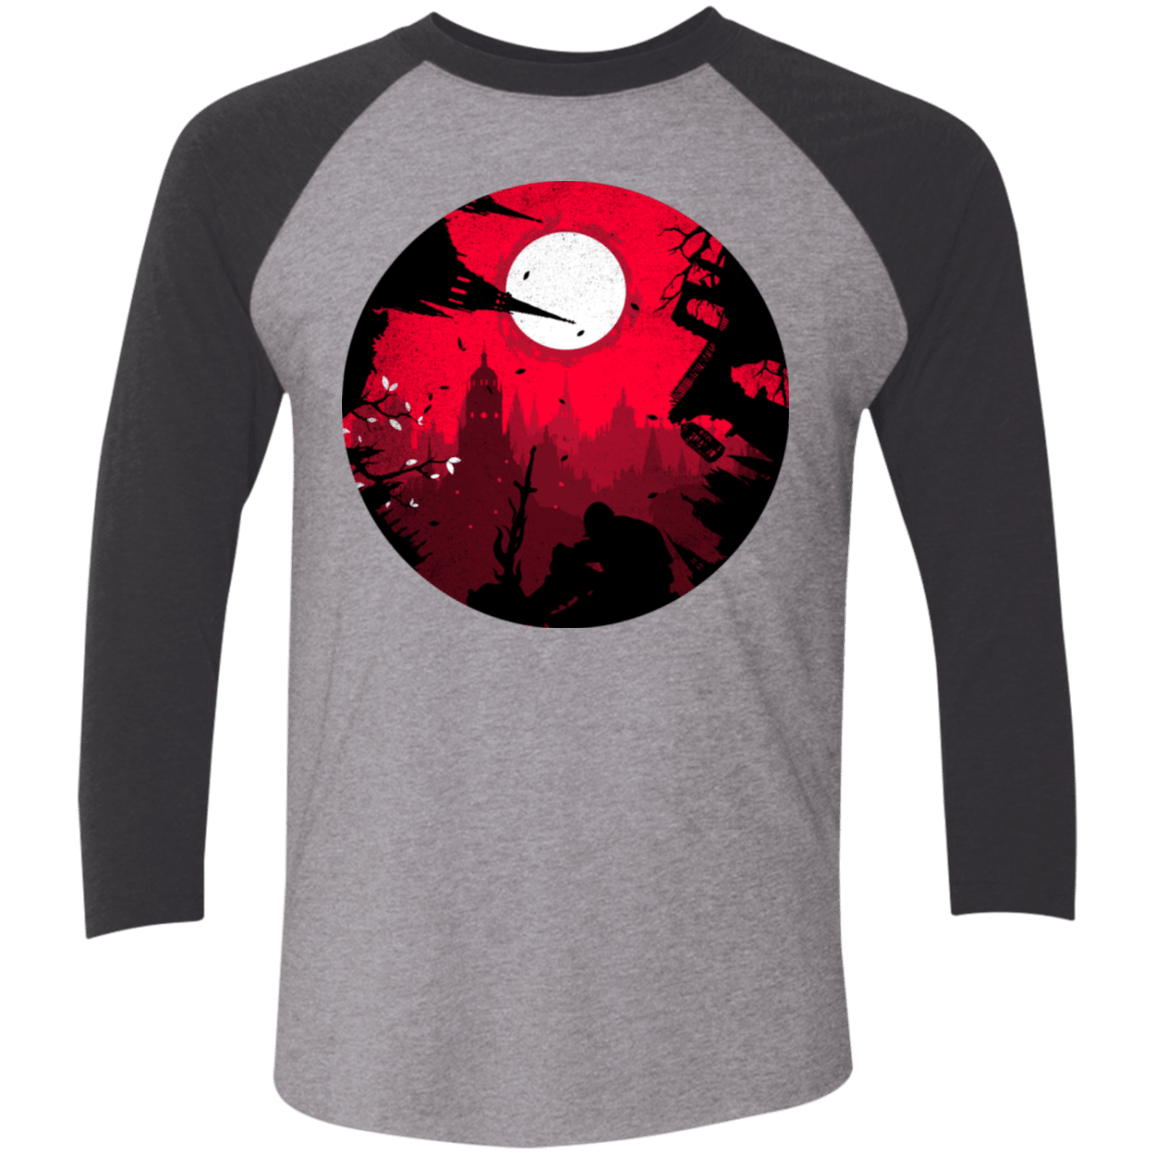 T-Shirts Premium Heather/Vintage Black / X-Small Embrace the Darkness Men's Triblend 3/4 Sleeve